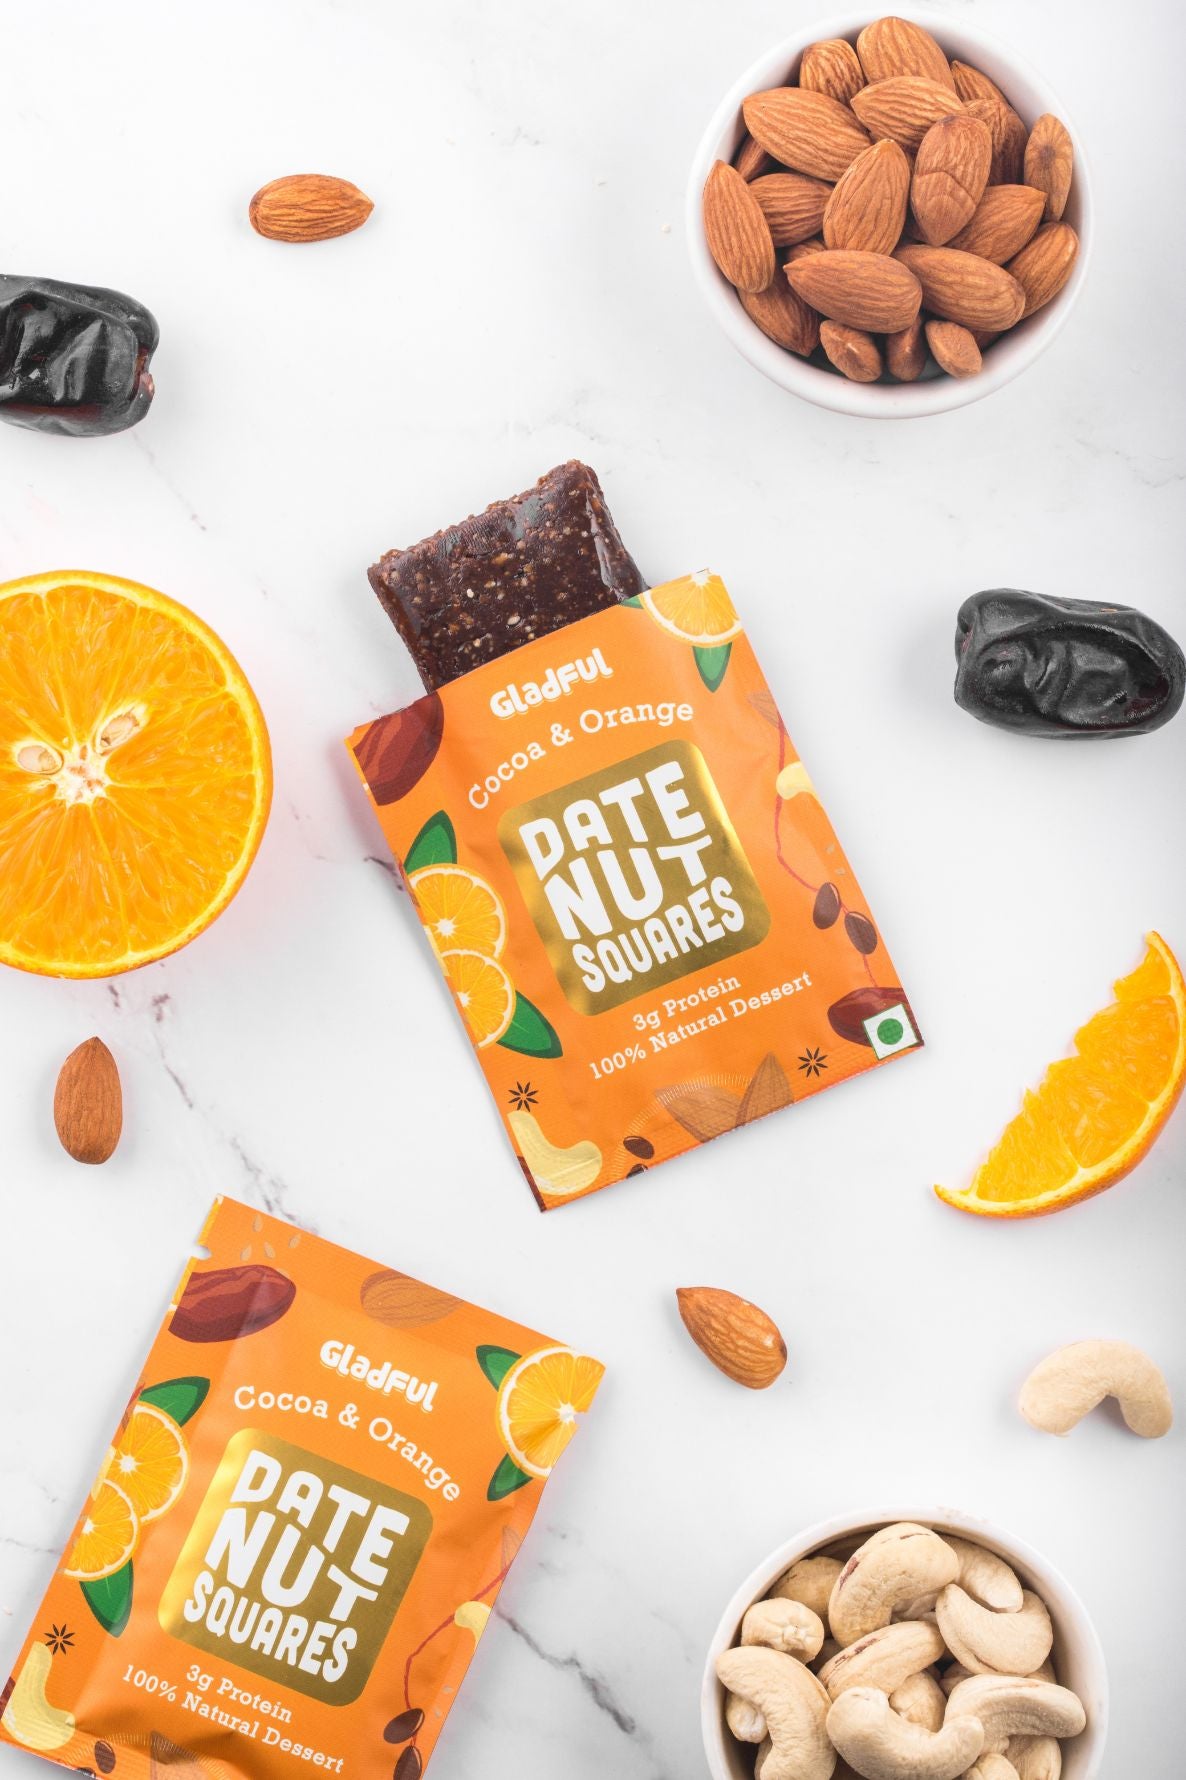 Date Nut Square Cashew and Orange (Pack of 2) : 8 Bars Each